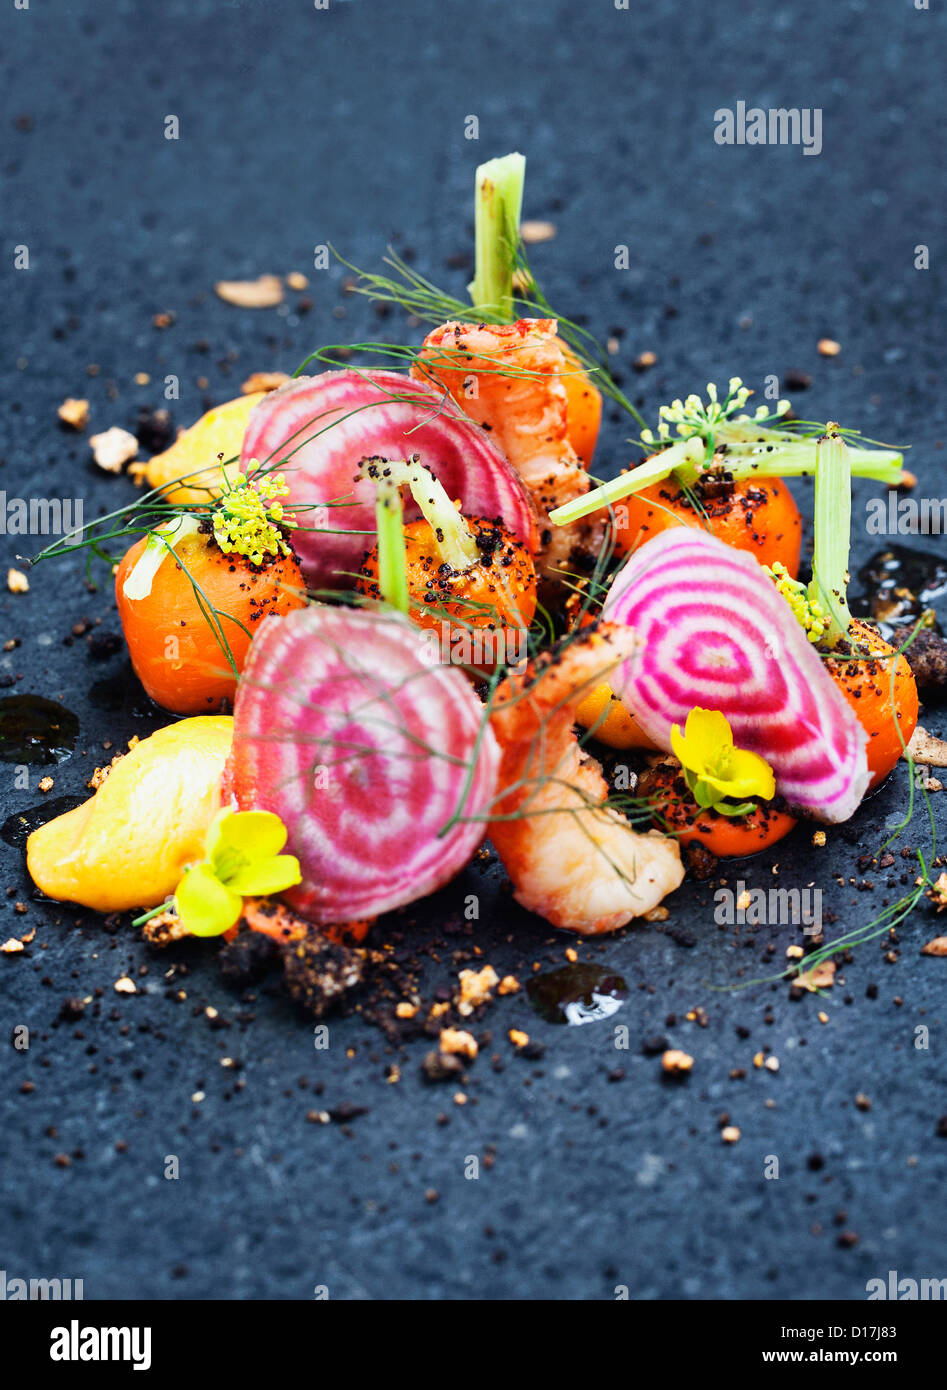 Onion, shrimp and herbs on plate Stock Photo